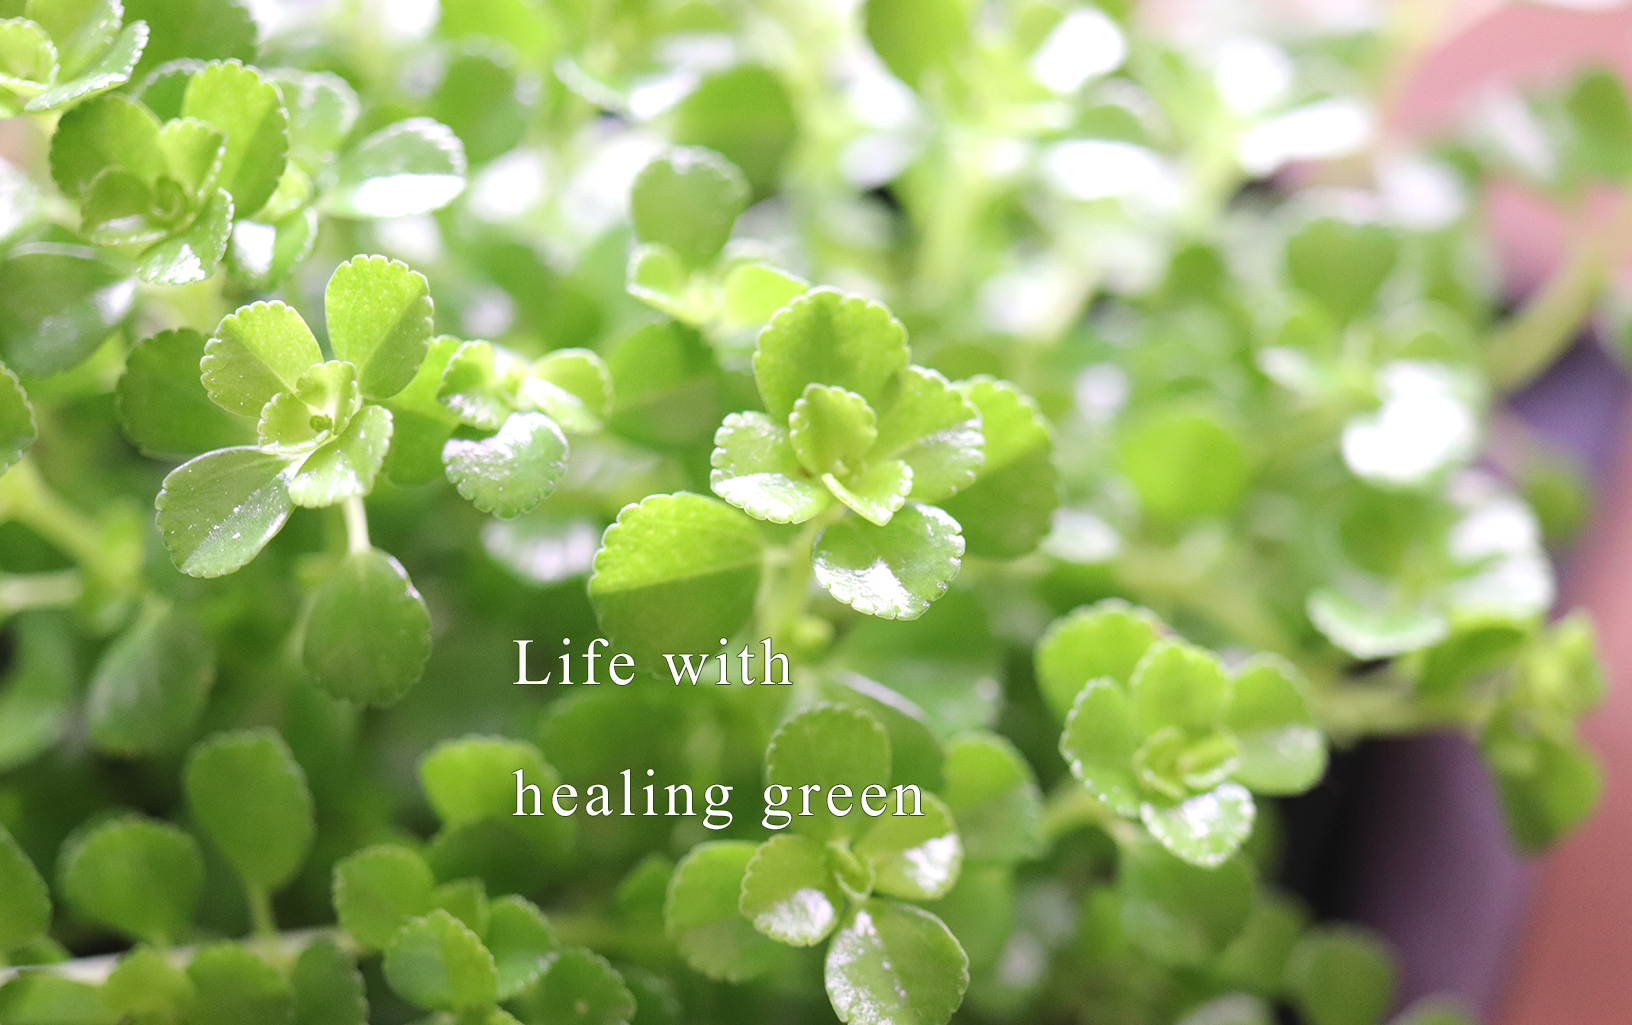 Life with healing green